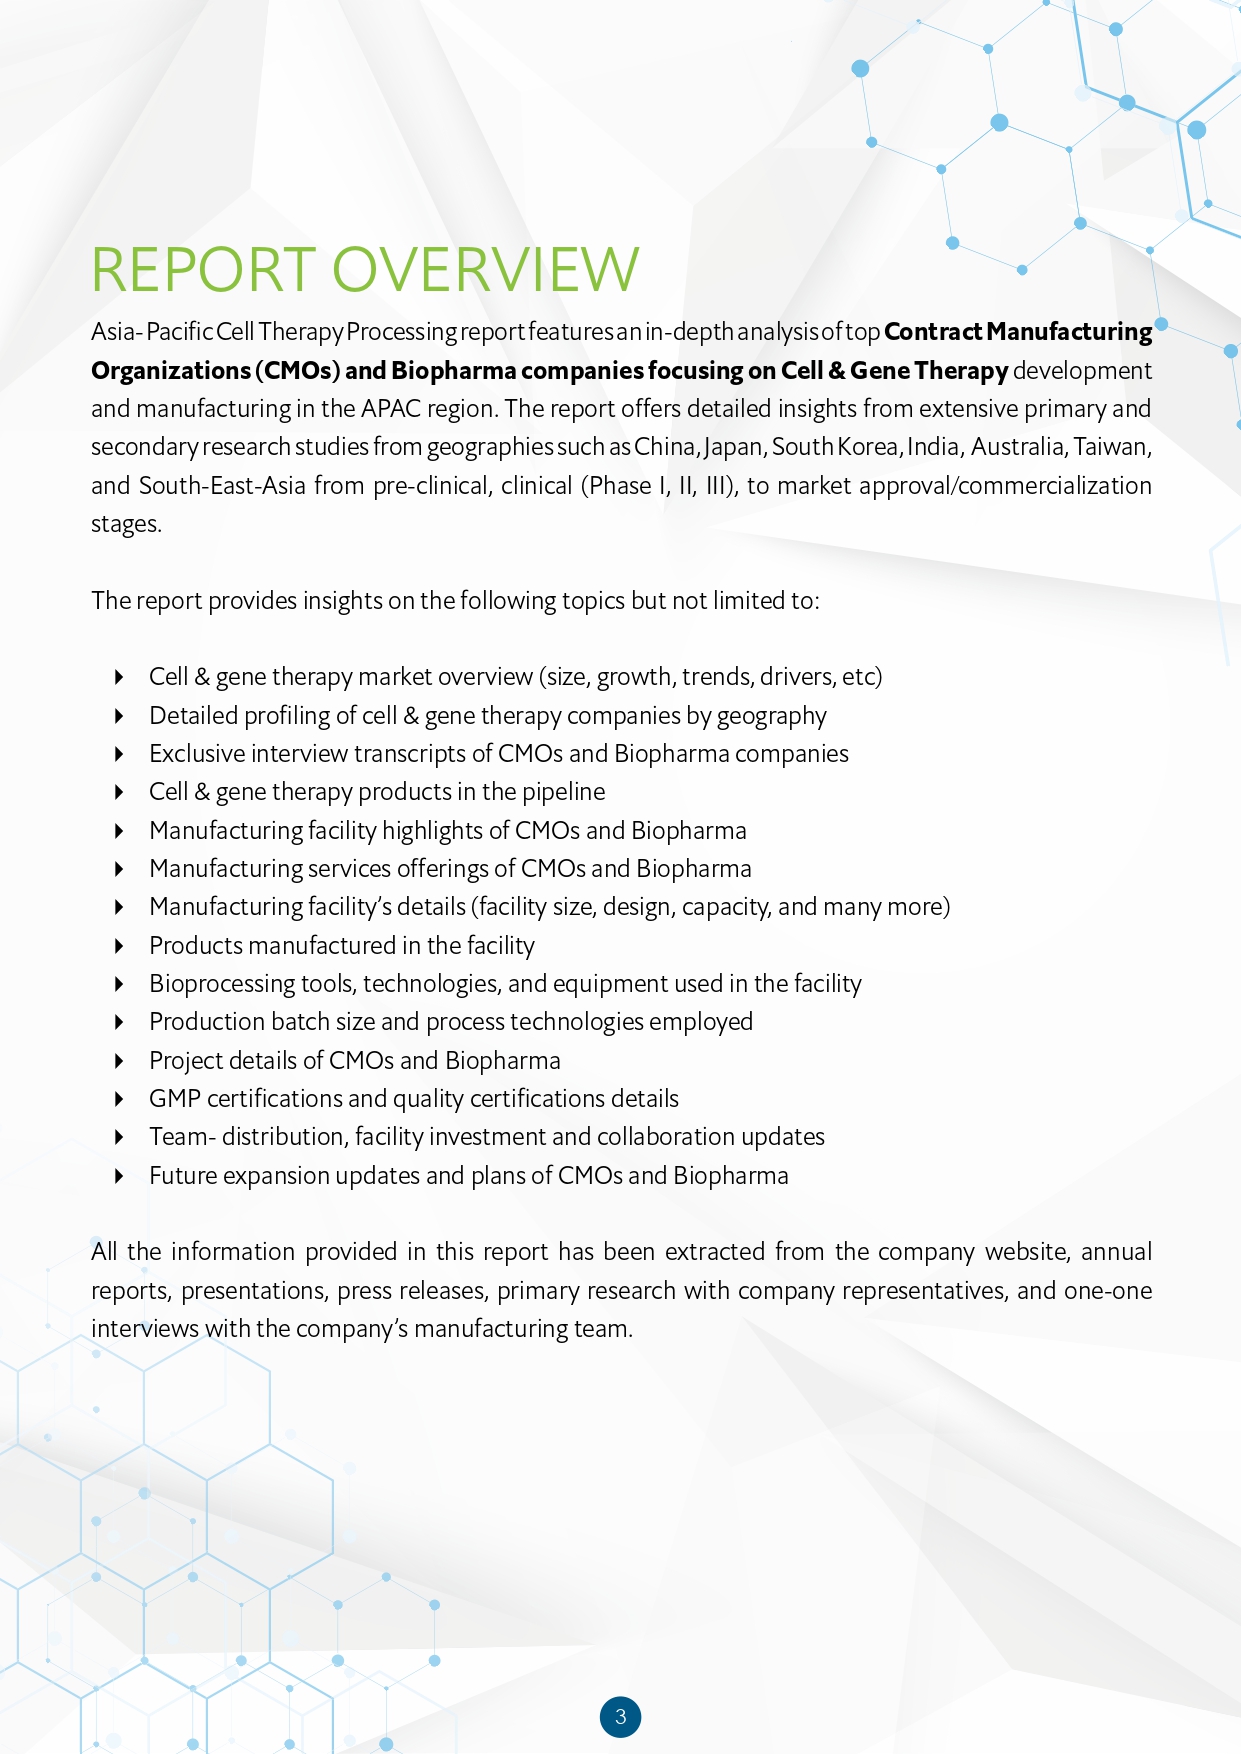 APAC CGT Report Preview- for data sample images – Copy_page-0004